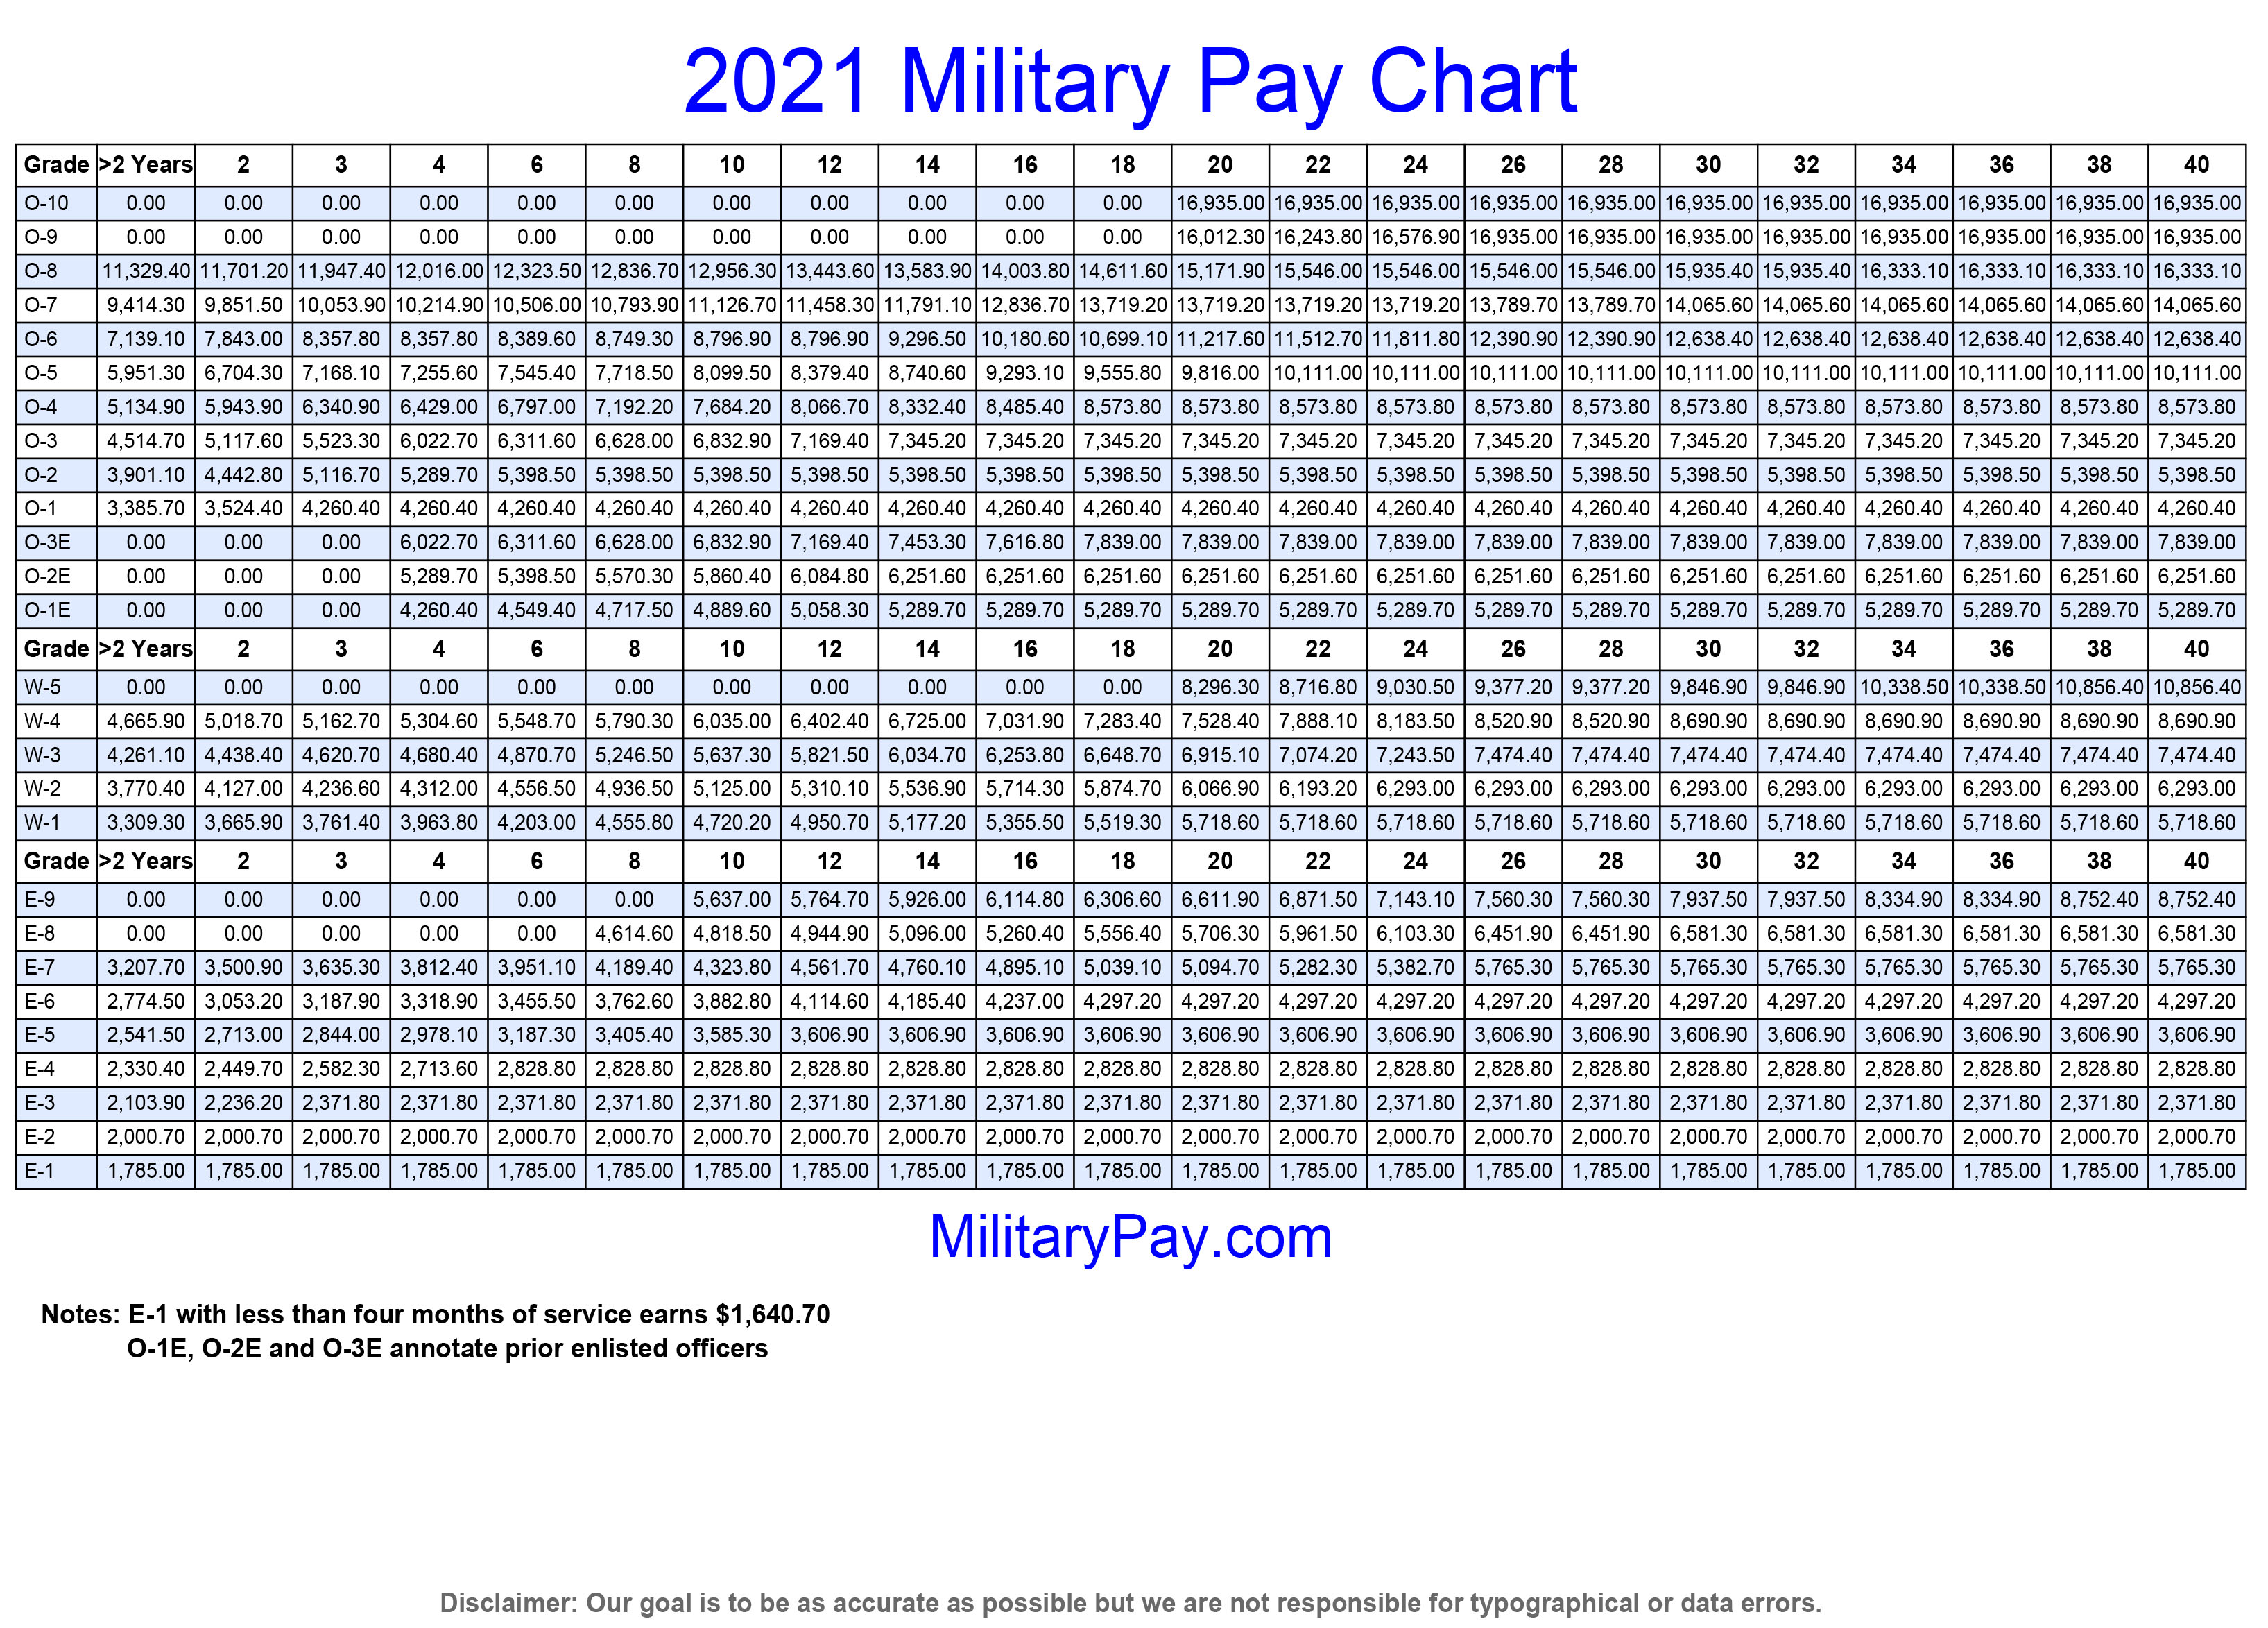 Military Pay Charts 1949 to 2023 plus estimated to 2050